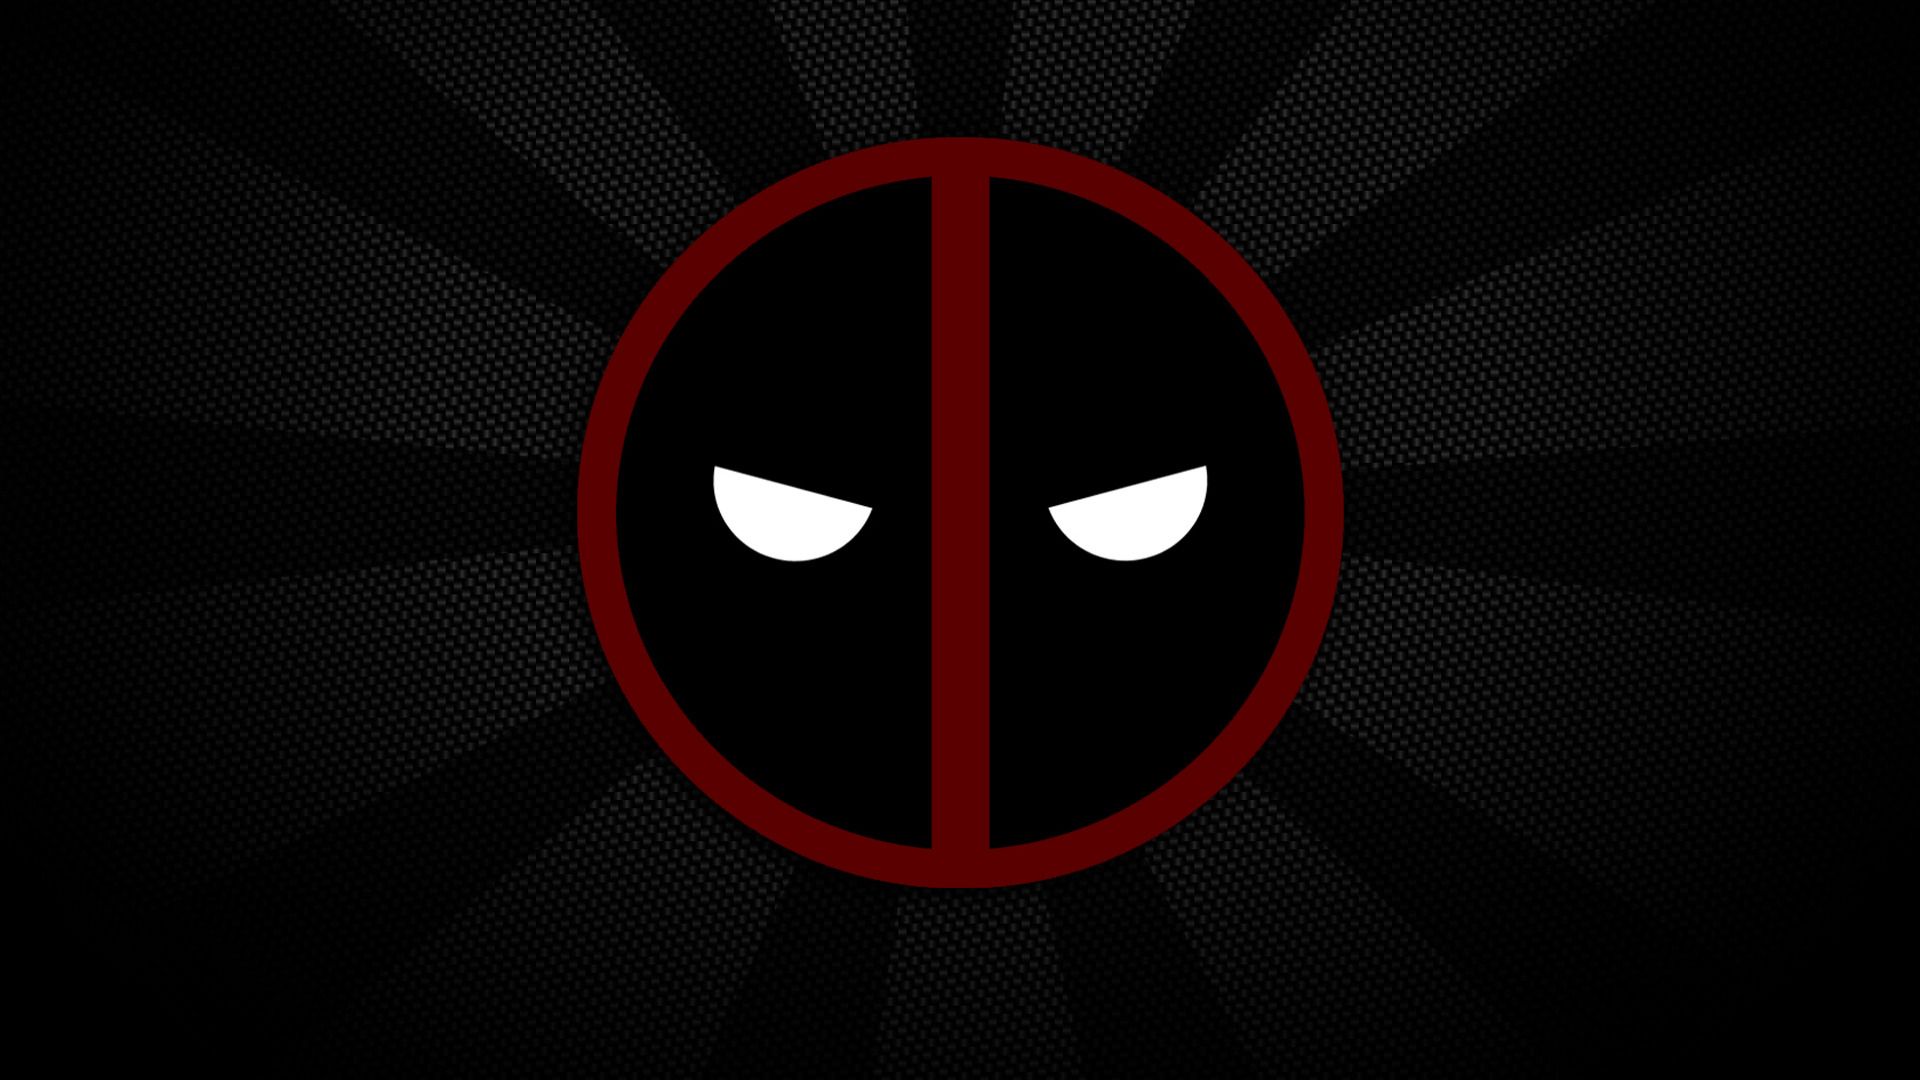 Top For Deadpool HD Wallpaper For Android Phone